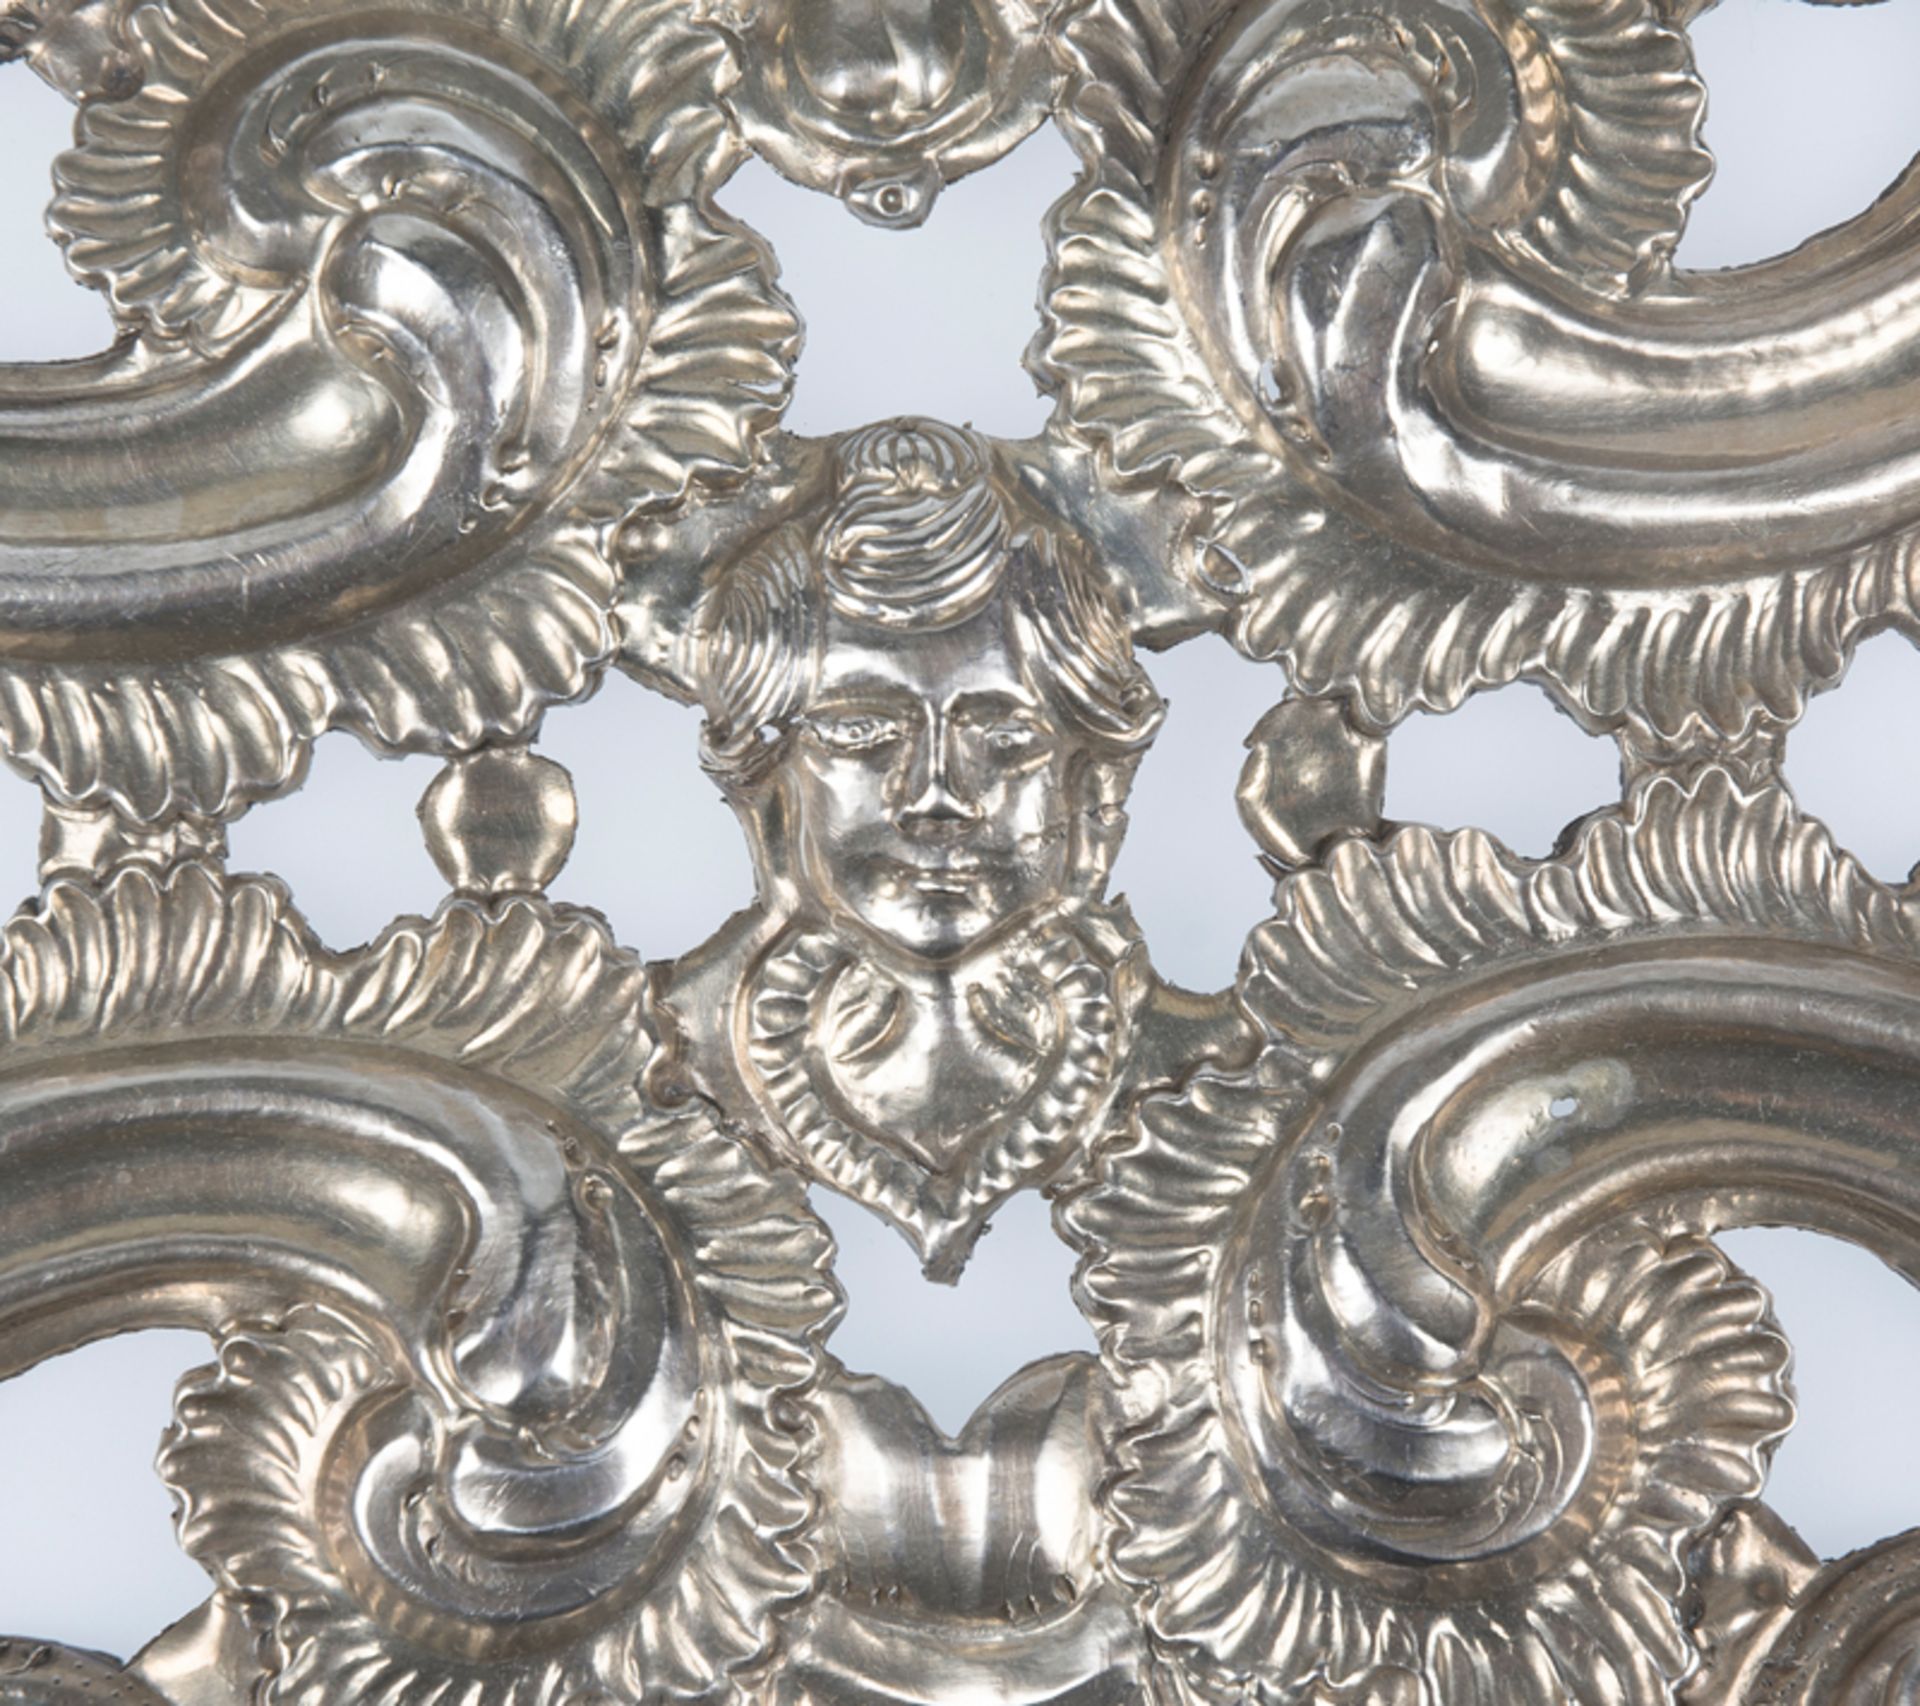 Set of six embossed, chased and pricked silver rosettes. Viceroyalty work. Peru. 18th centurySet - Image 6 of 6